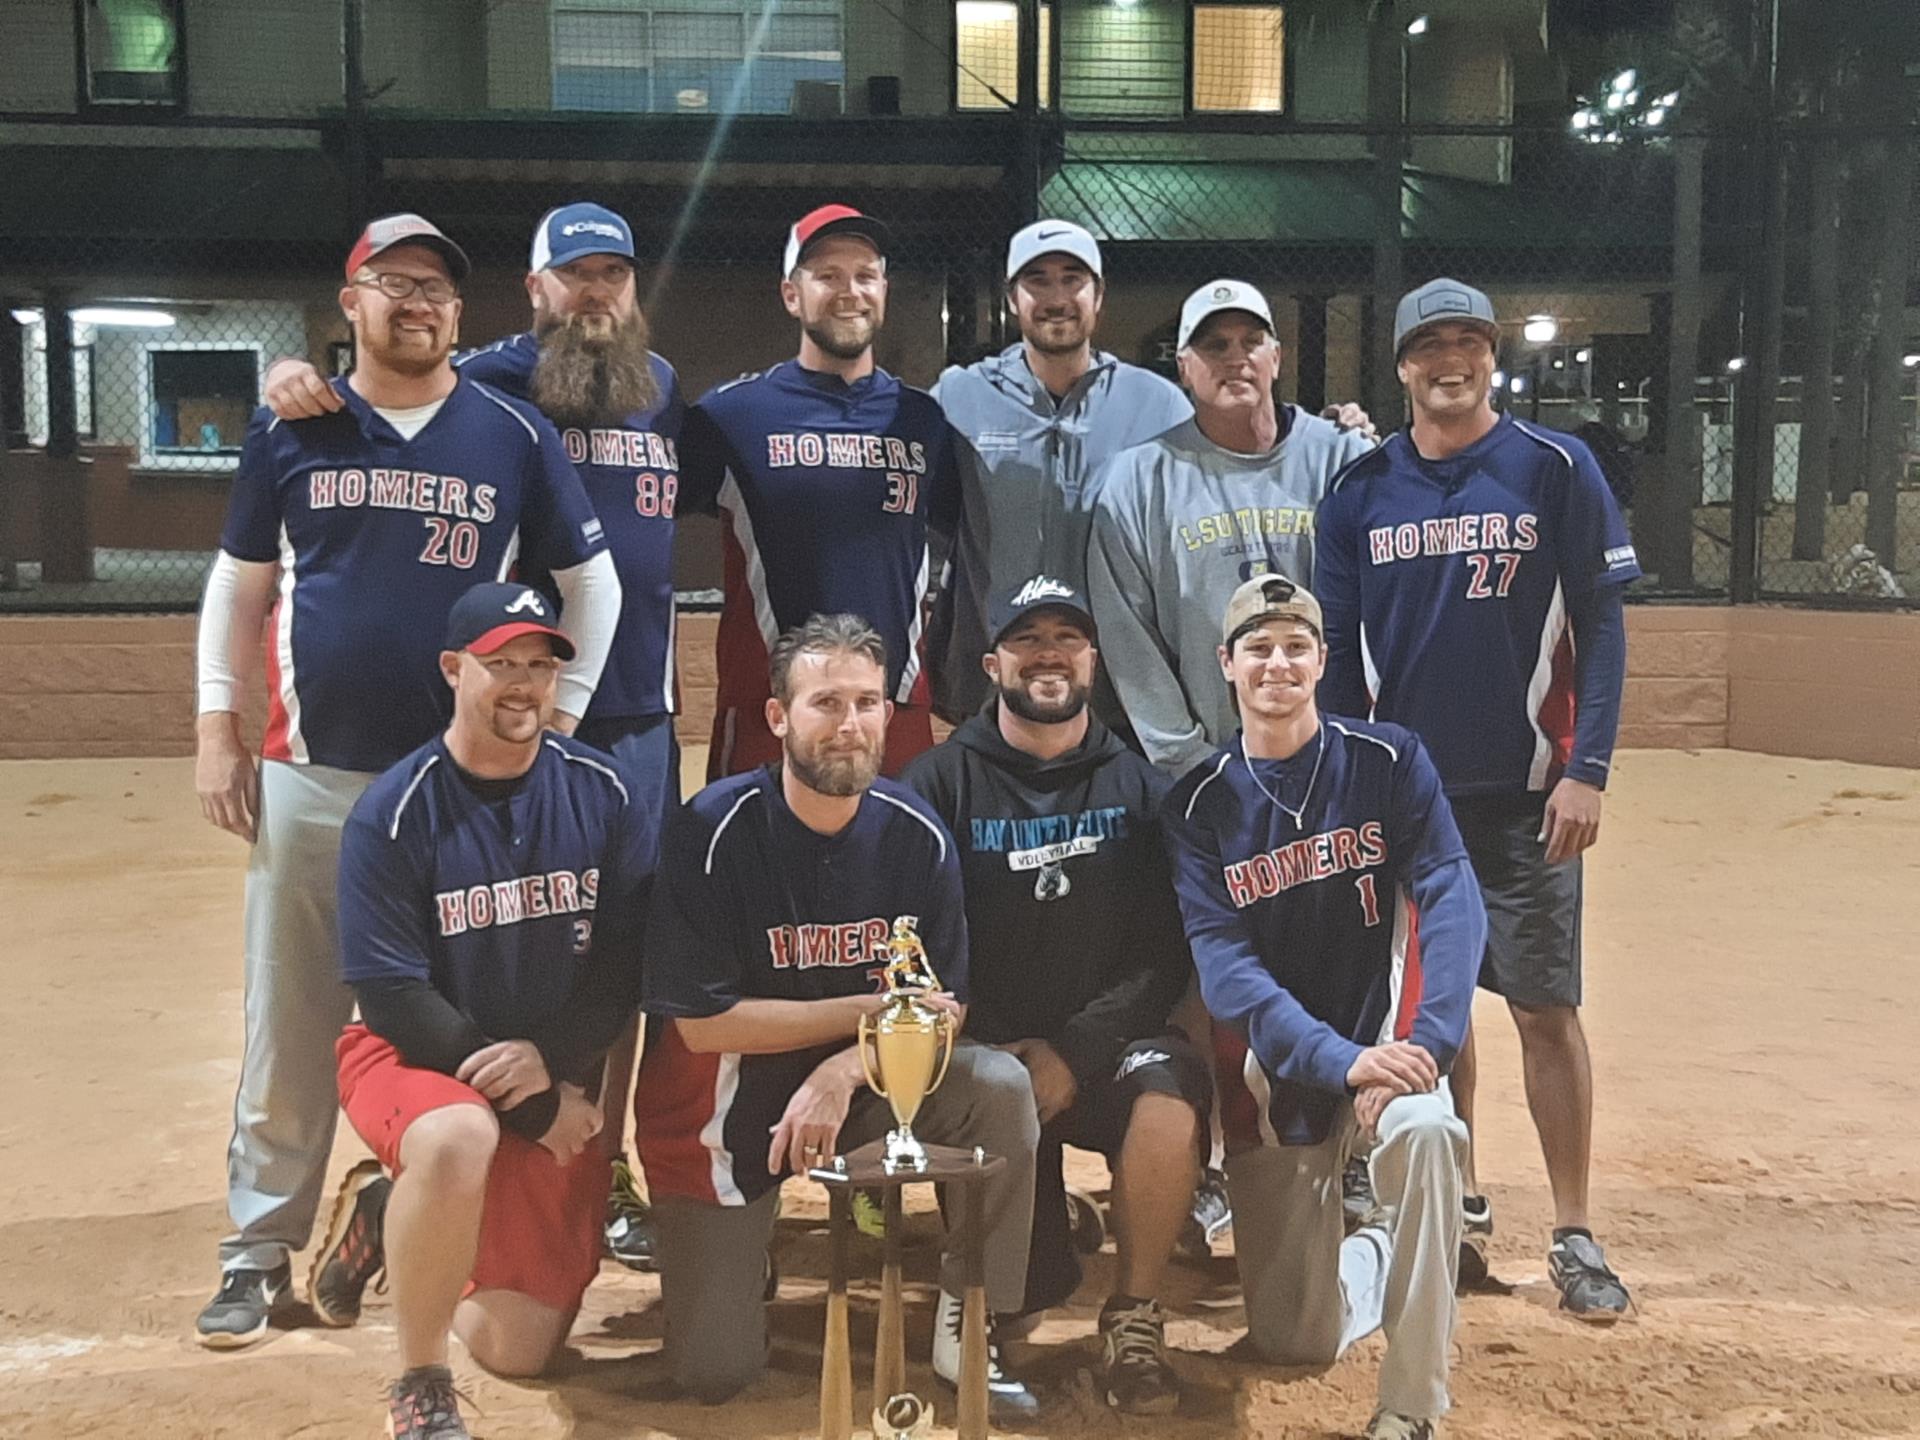 Mens- Hortons Homers 1st place C division